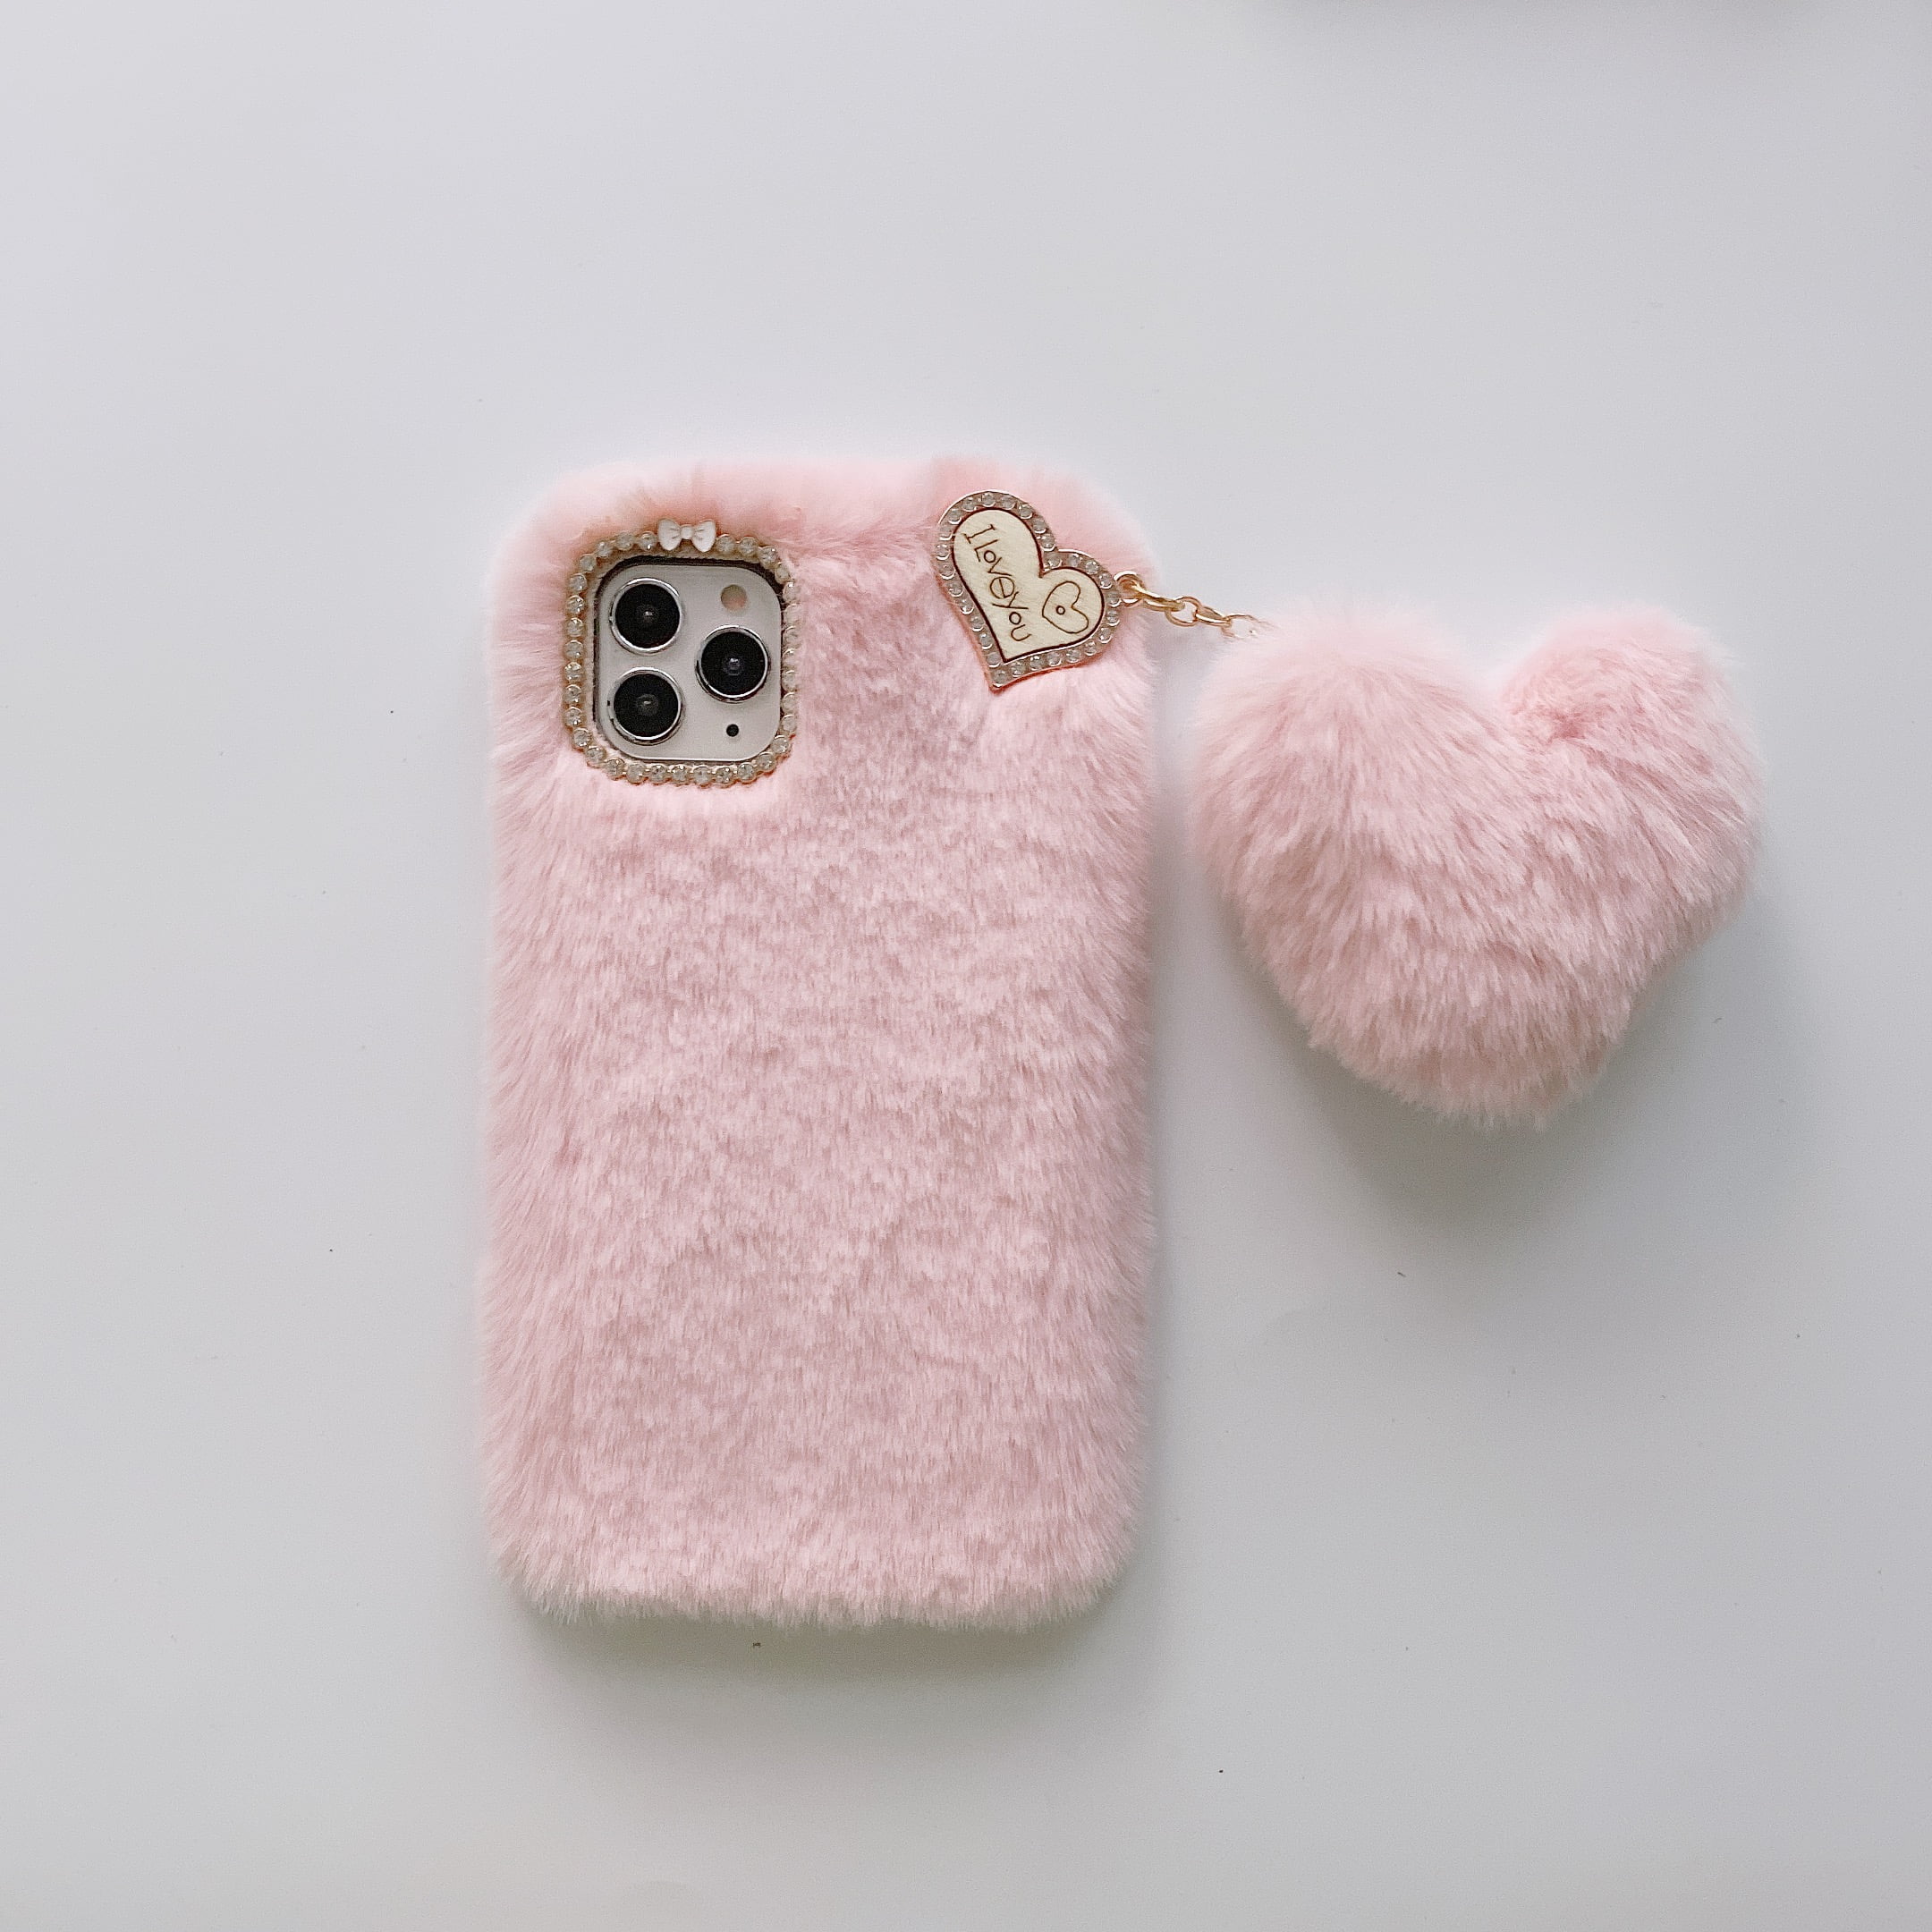 Allytech iPhone 12 Case, iPhone 12 Pro Case, Cute Girly Soft Warm Faux Fur with Heart Ball Protective Shockproof Case for Girls Women Cover for Apple